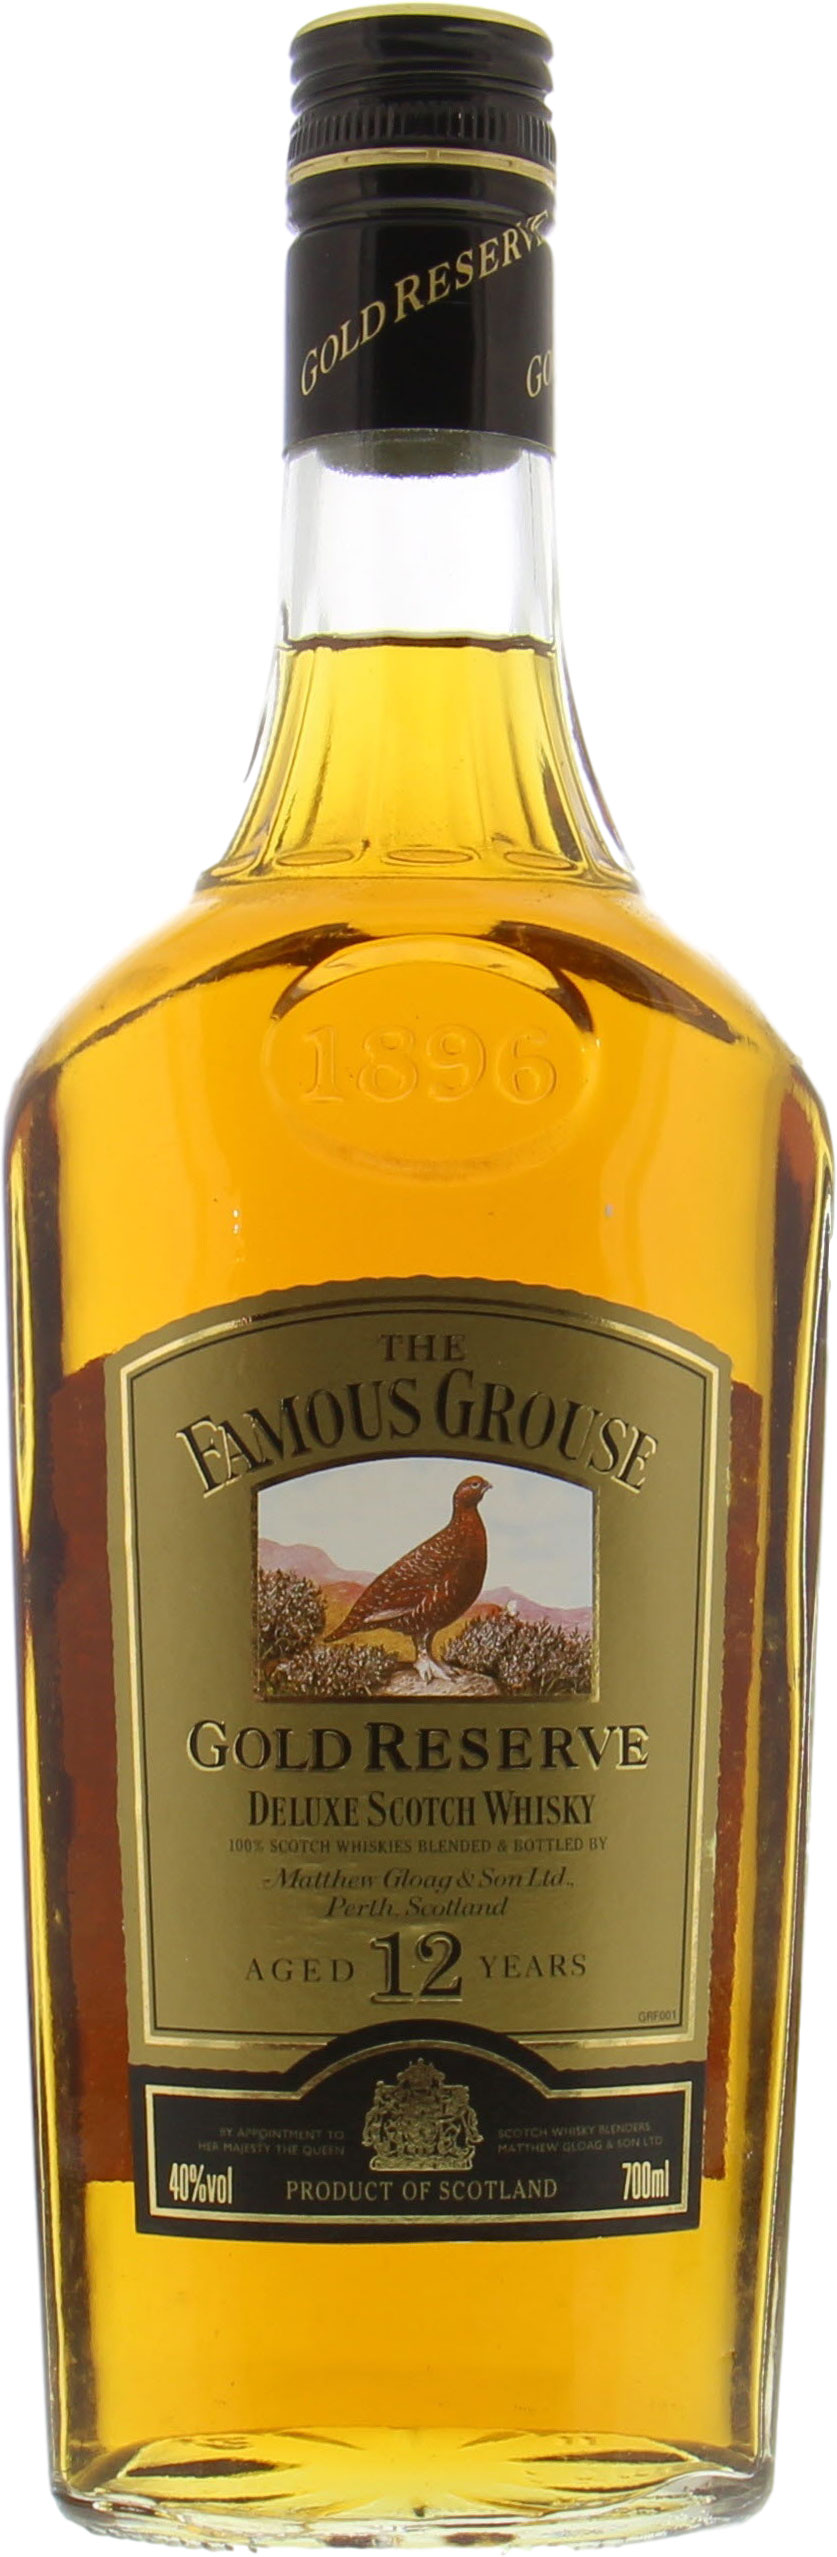 The Famous Grouse - 12 Years Old Gold Reserve 40% NV No Original Container